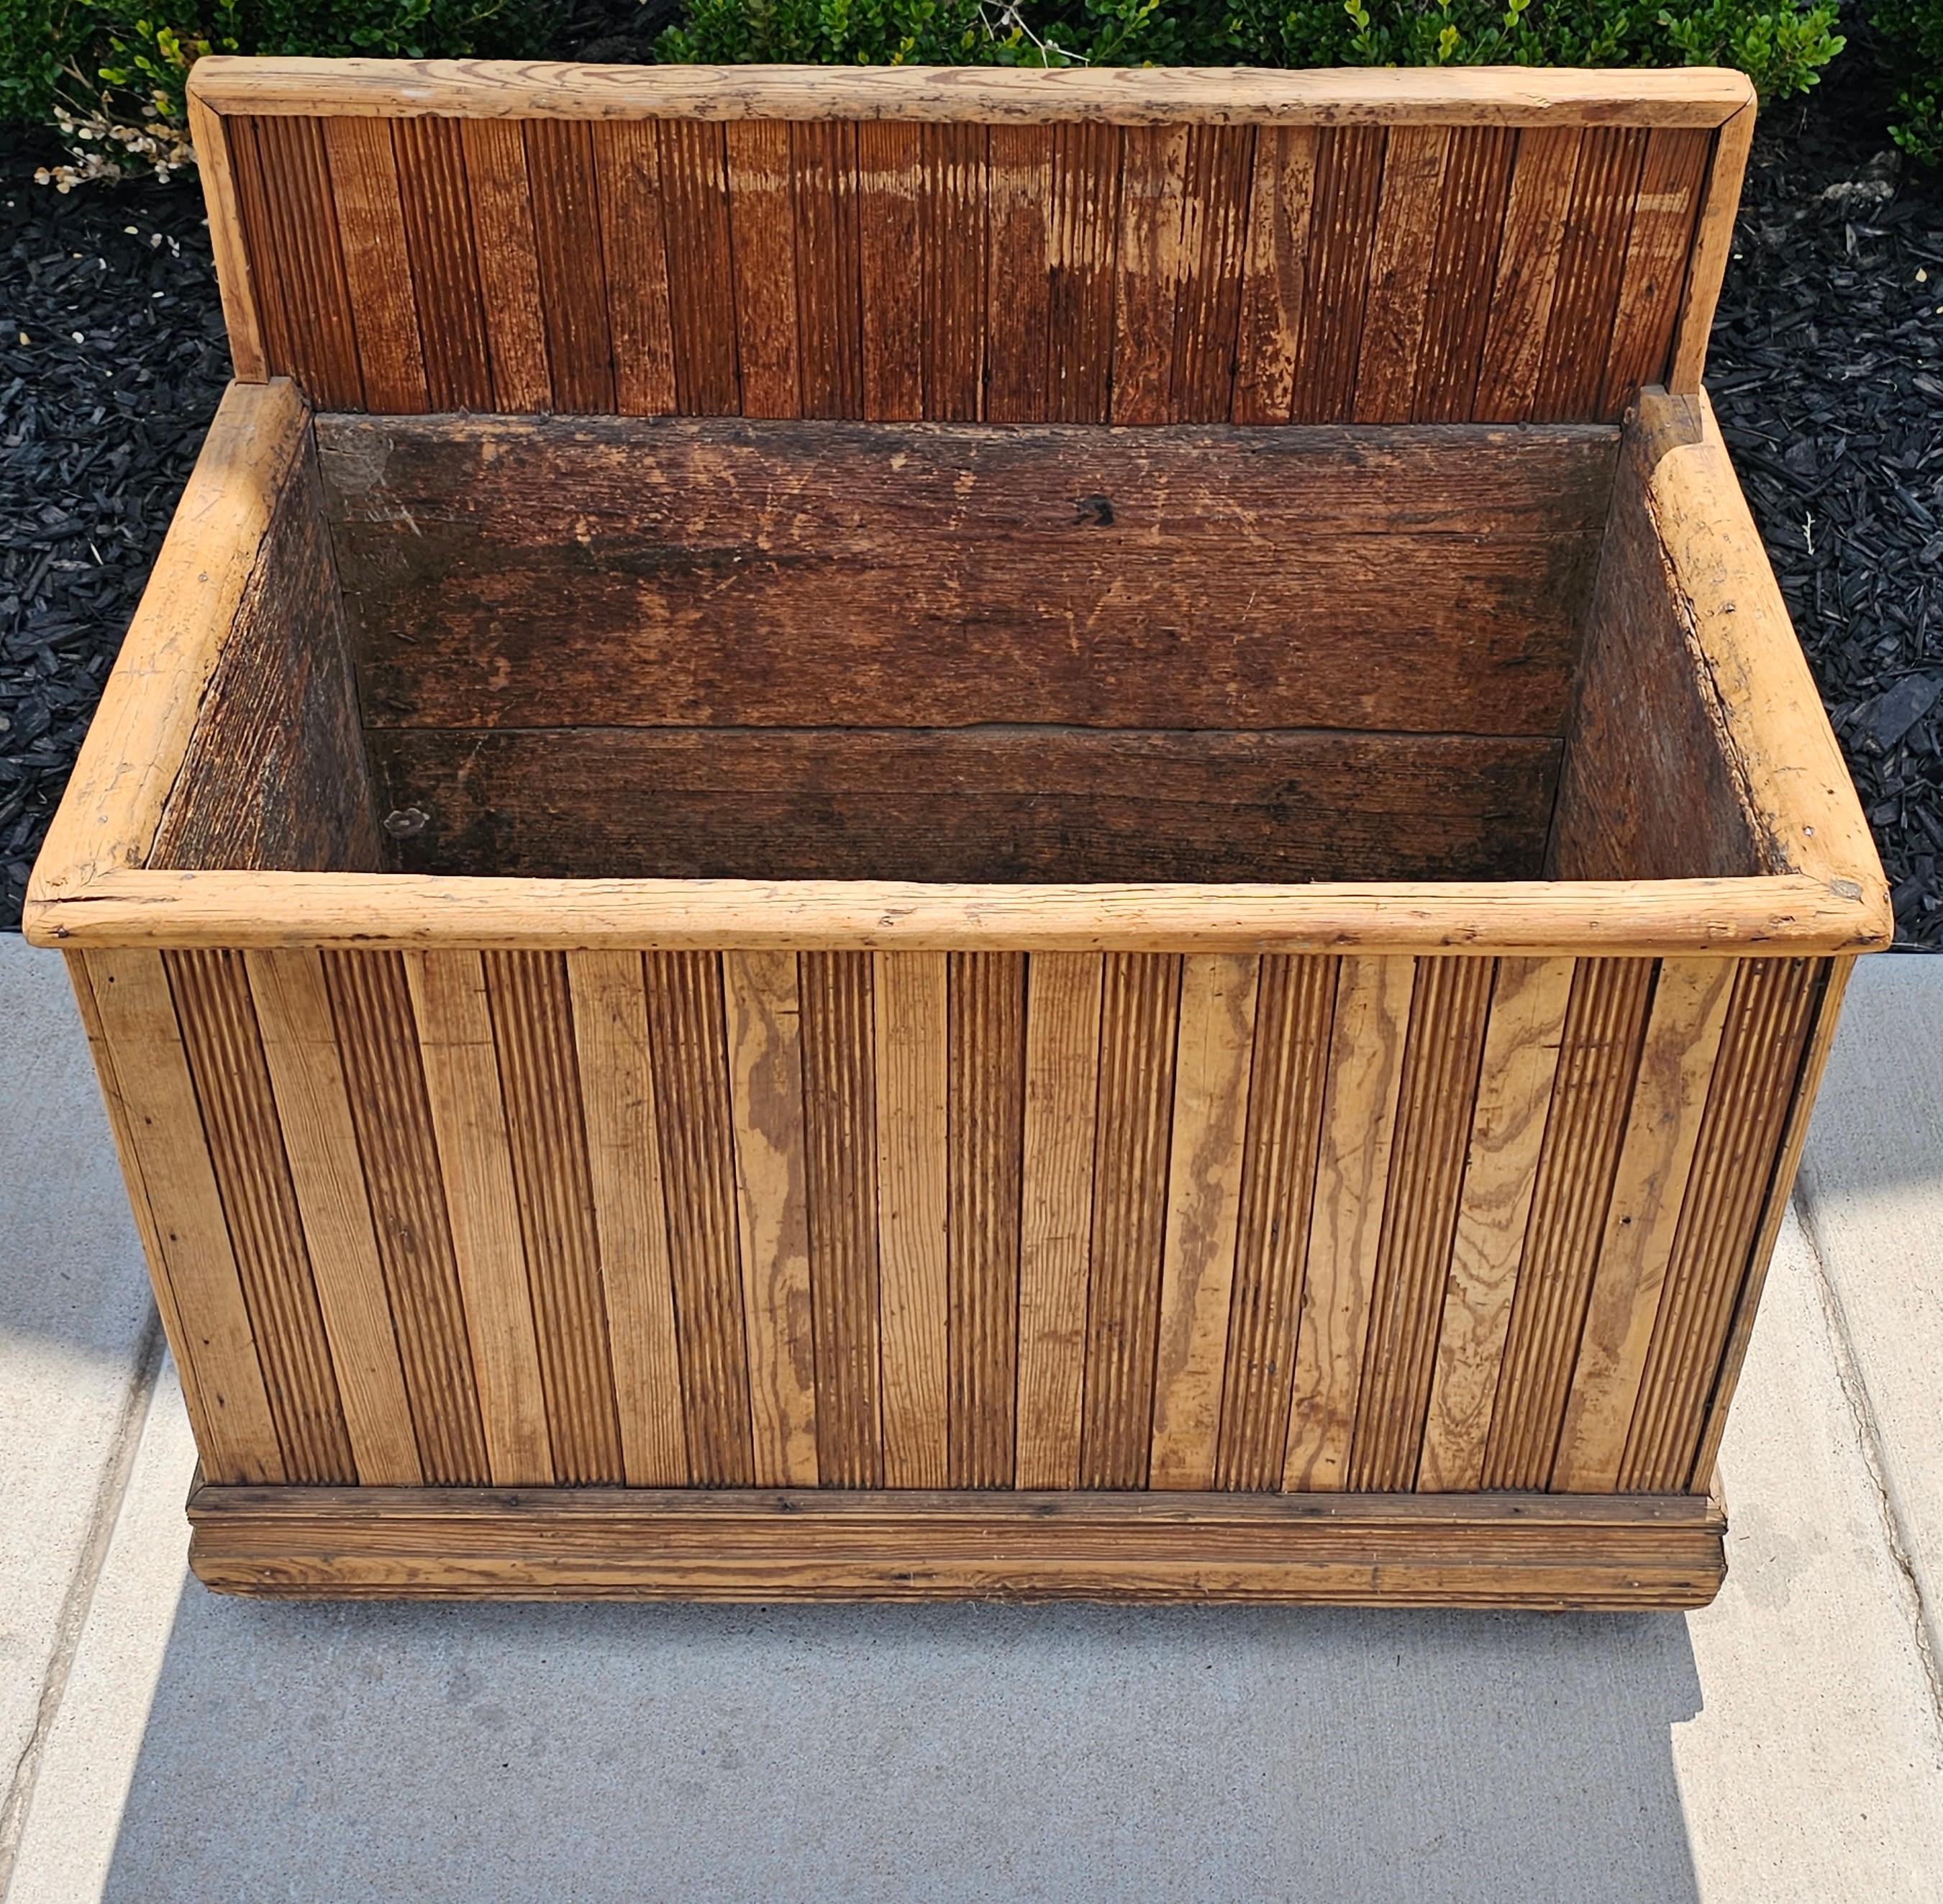 A primitive hand-crafted solid wooden open storage chest fire wood bin with beautifully aged warm rustic distressed patina!

19th century, Northern European, most likely Scandinavian country farmhouse, rectangular with open top and raised back,